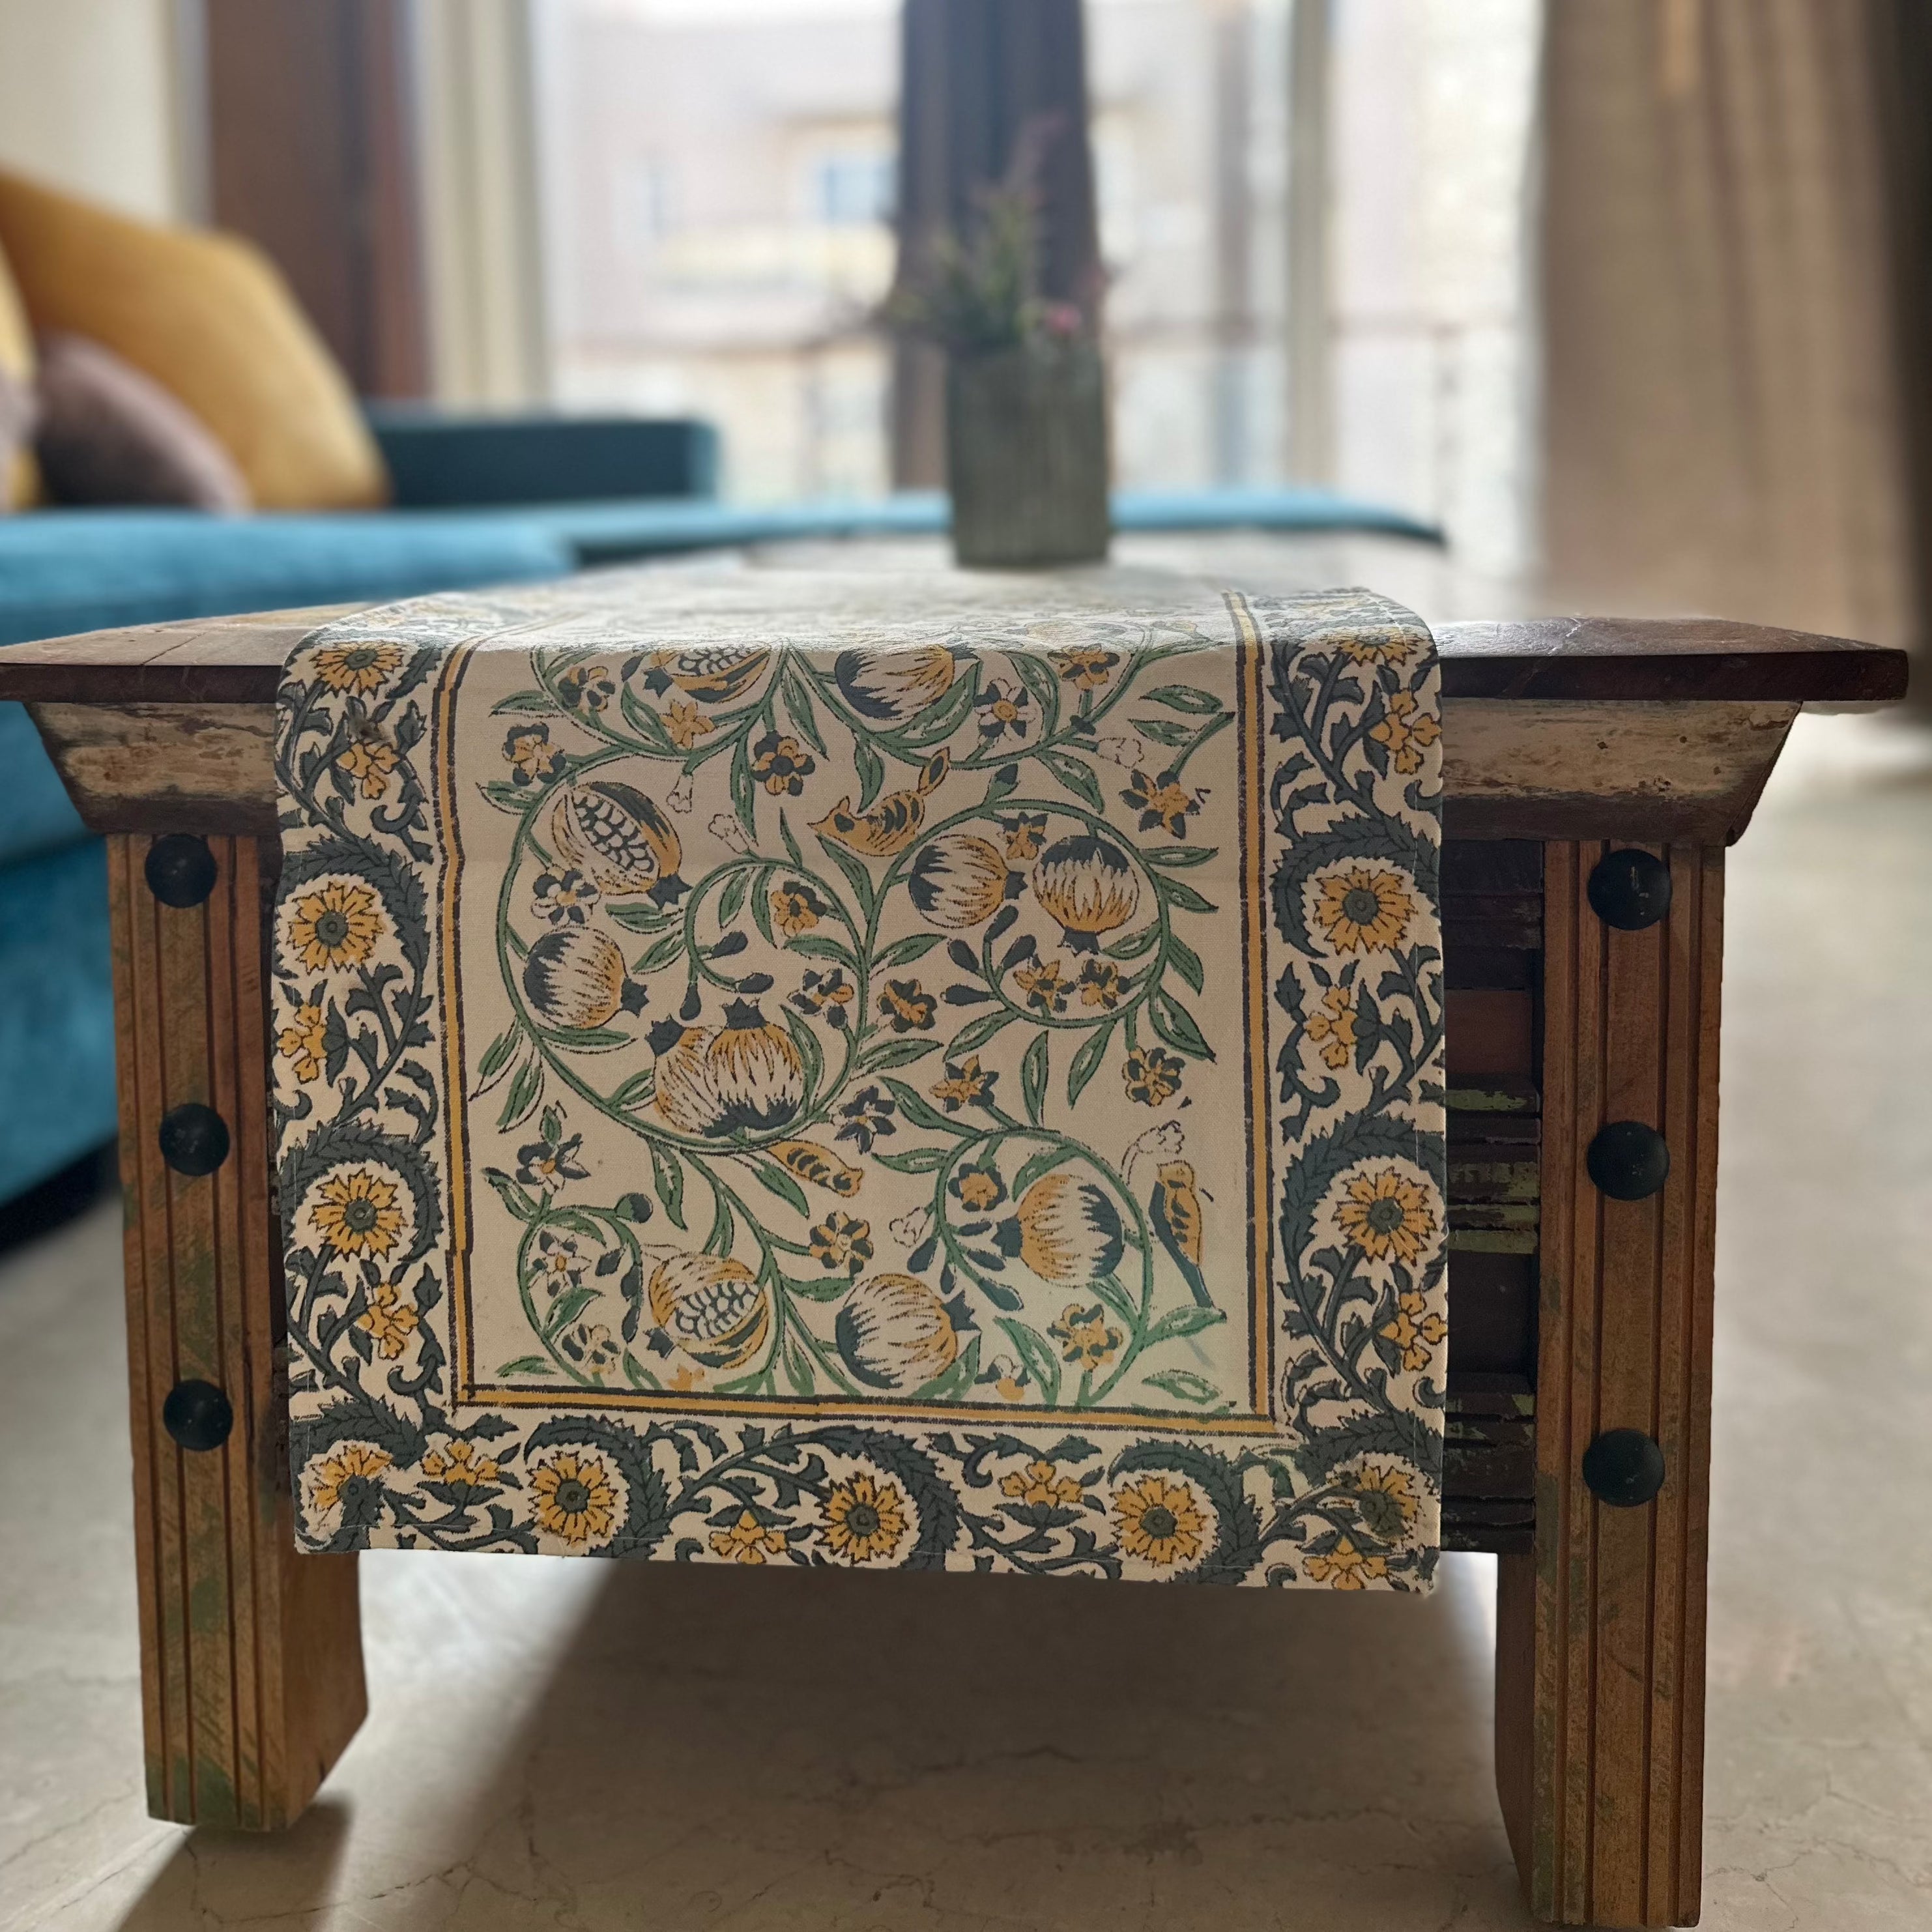 a wooden table with a floral design on it